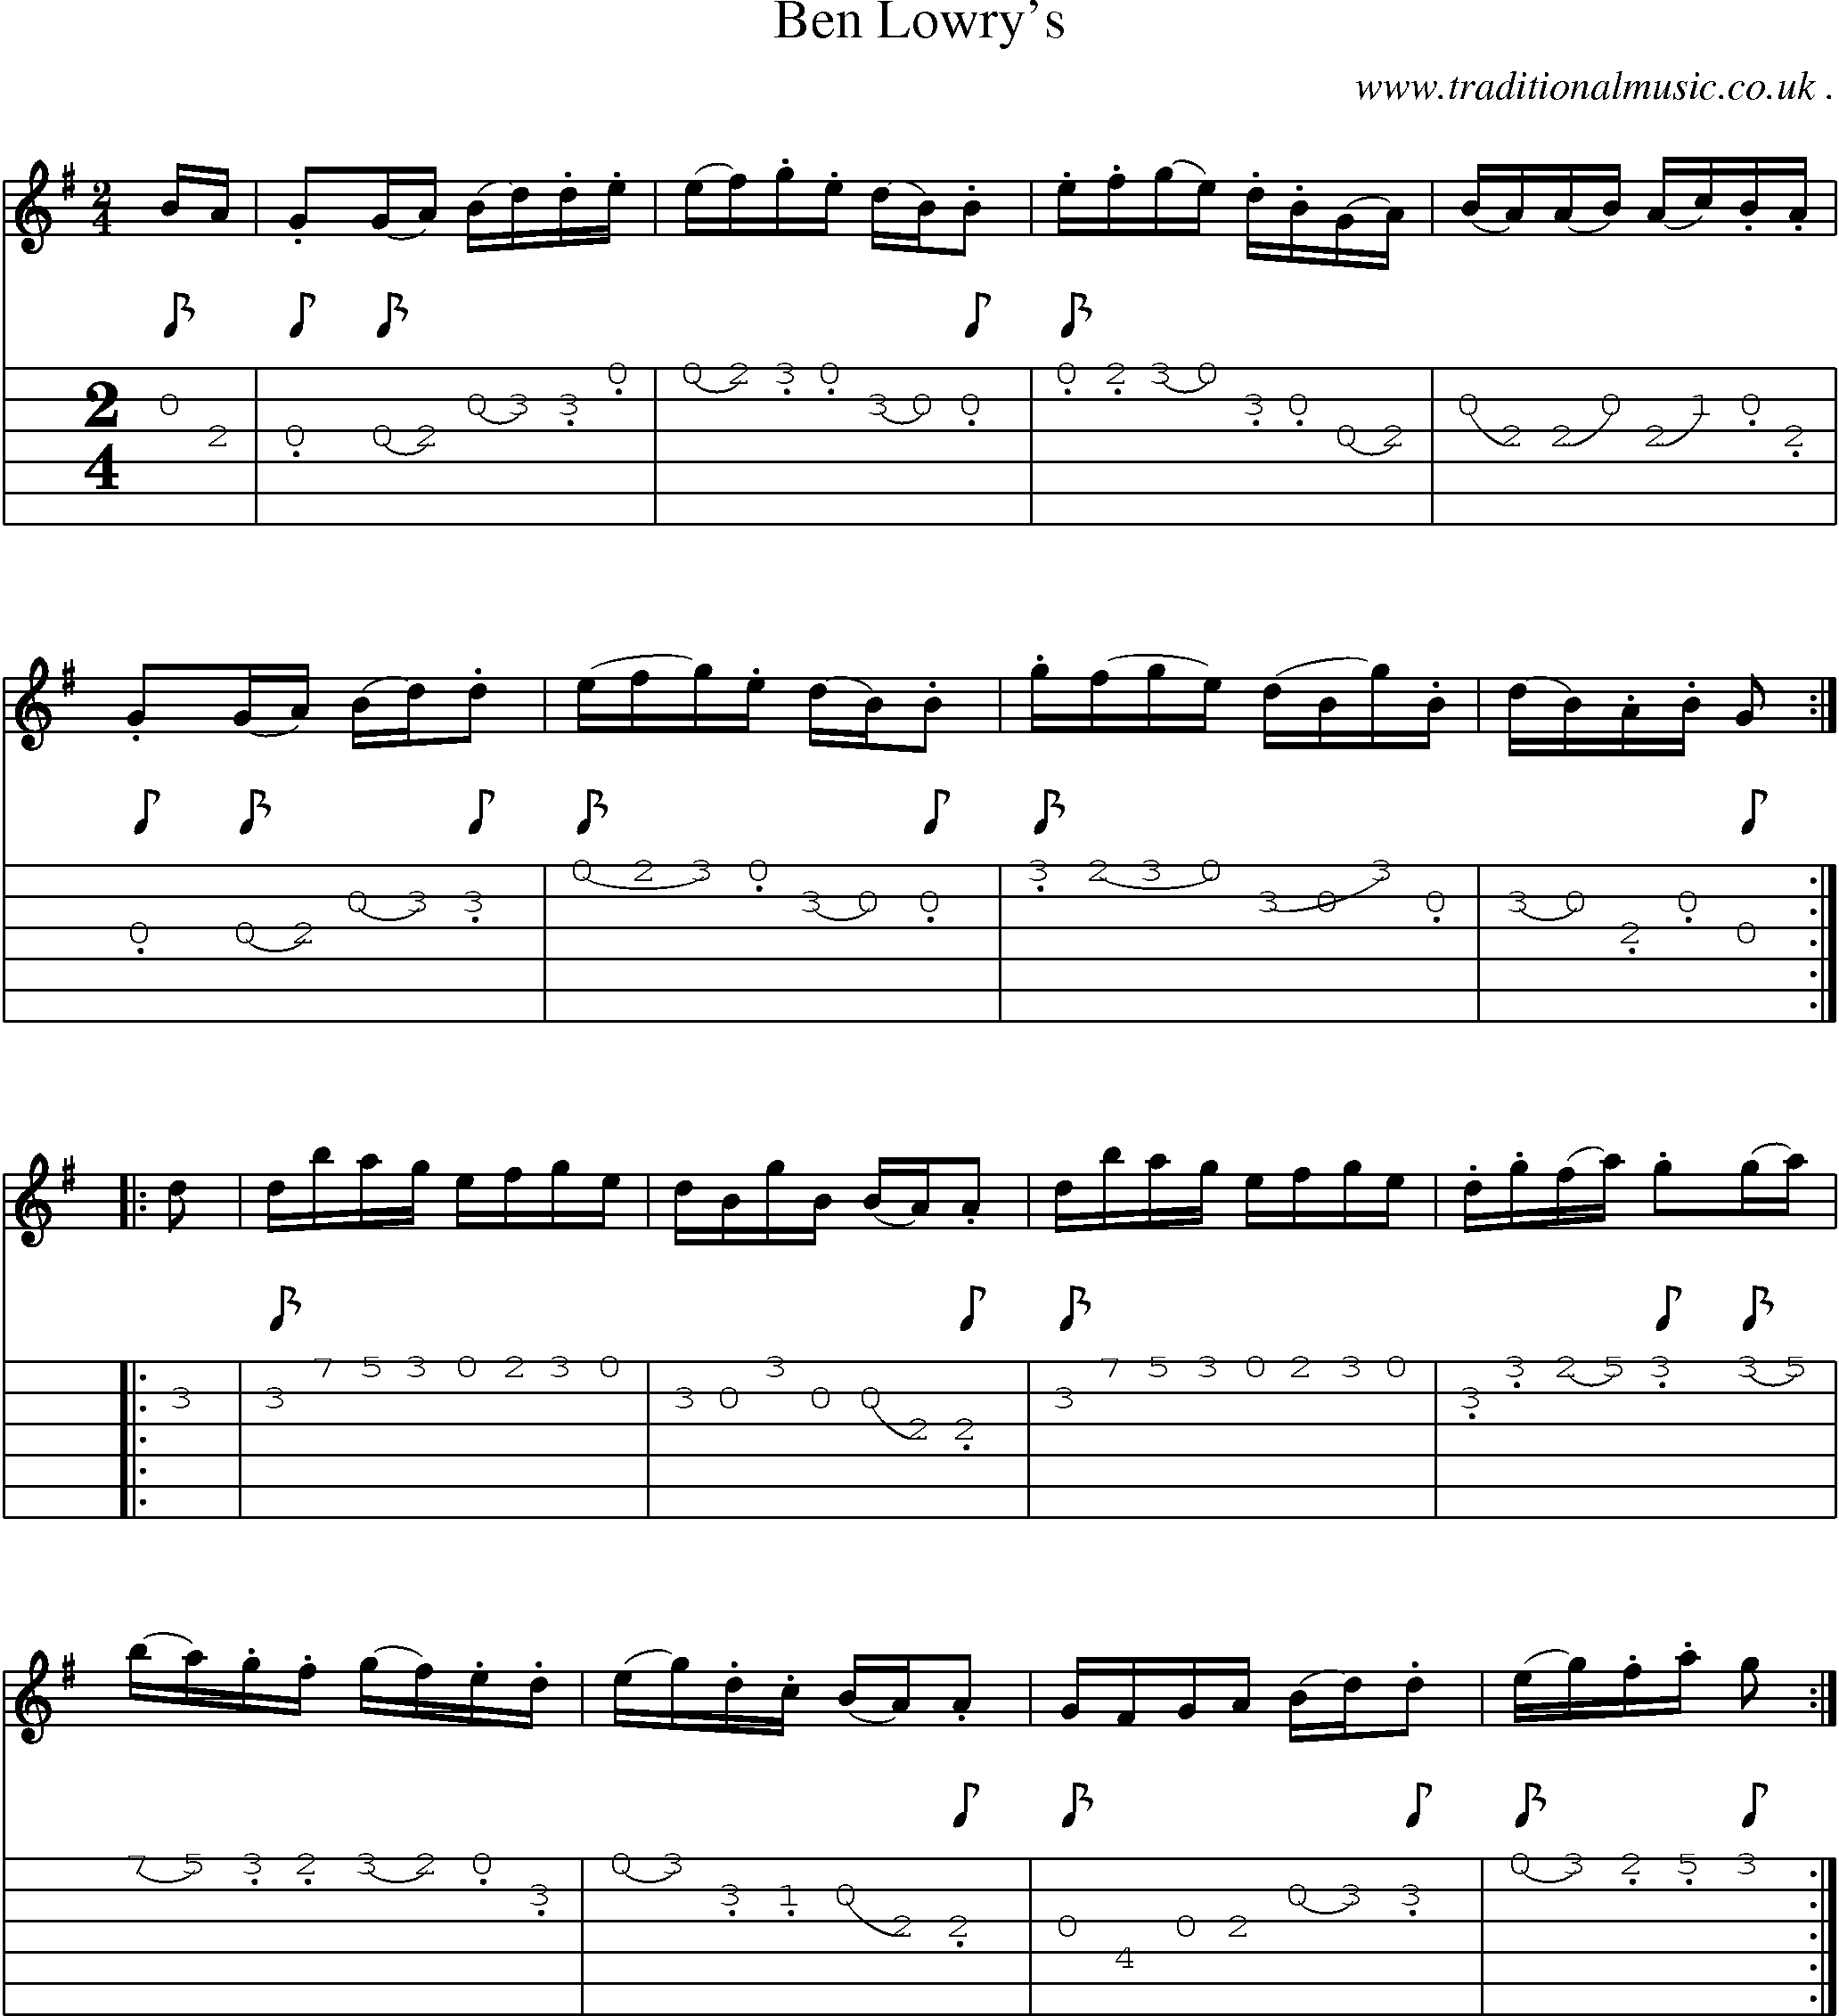 Sheet-Music and Guitar Tabs for Ben Lowrys